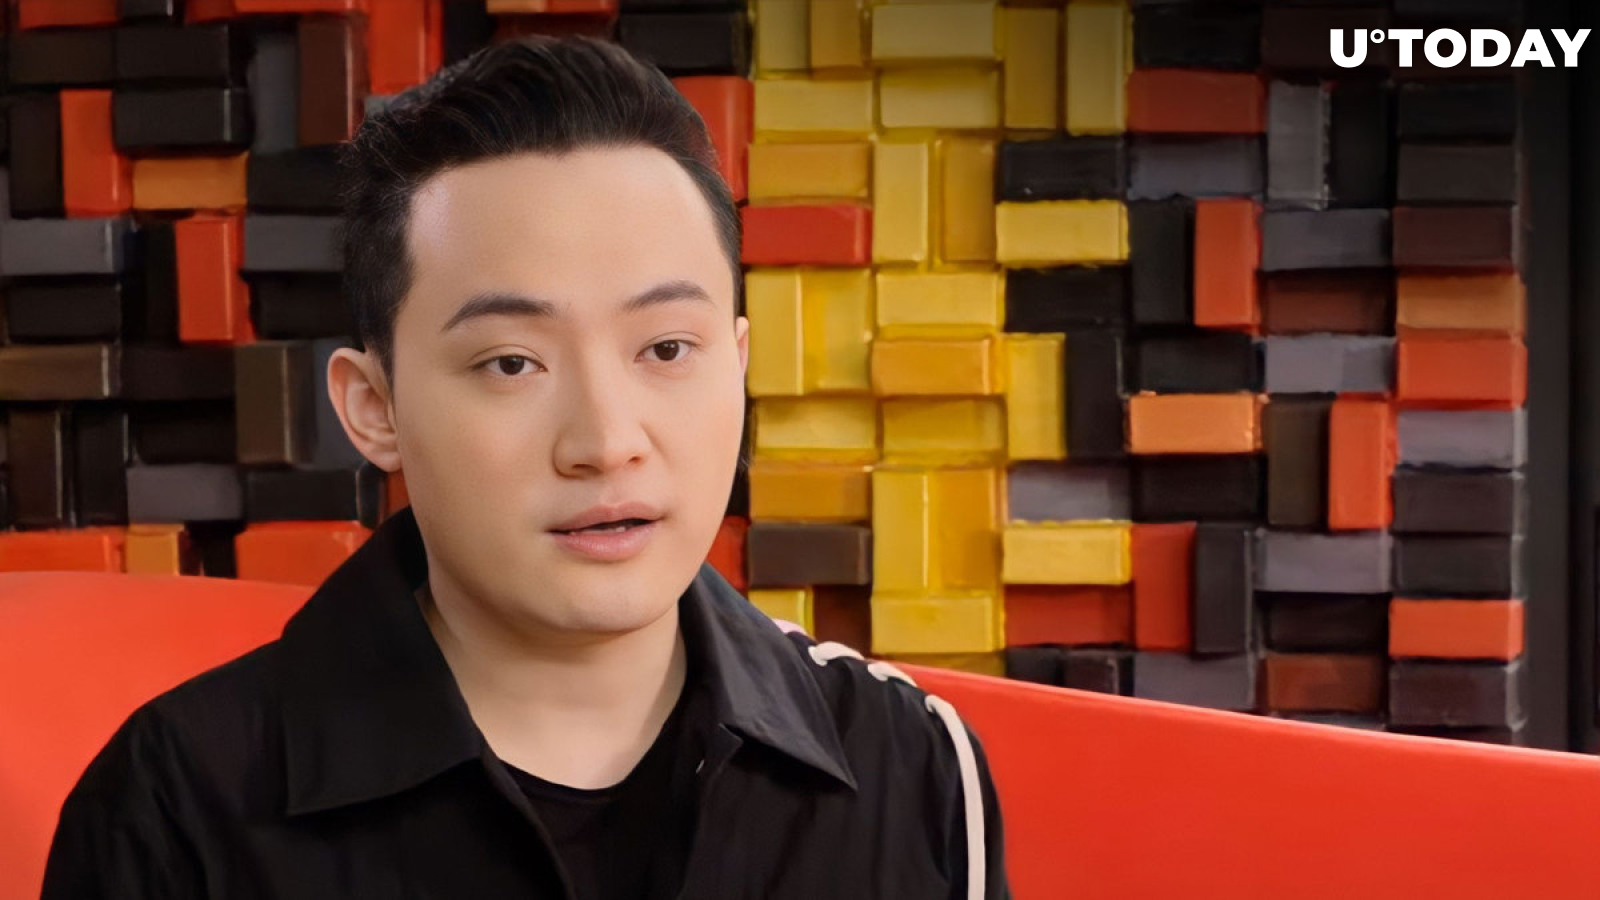 Justin Sun Puts $33 Million on Aave Lending Pool, Here's Why